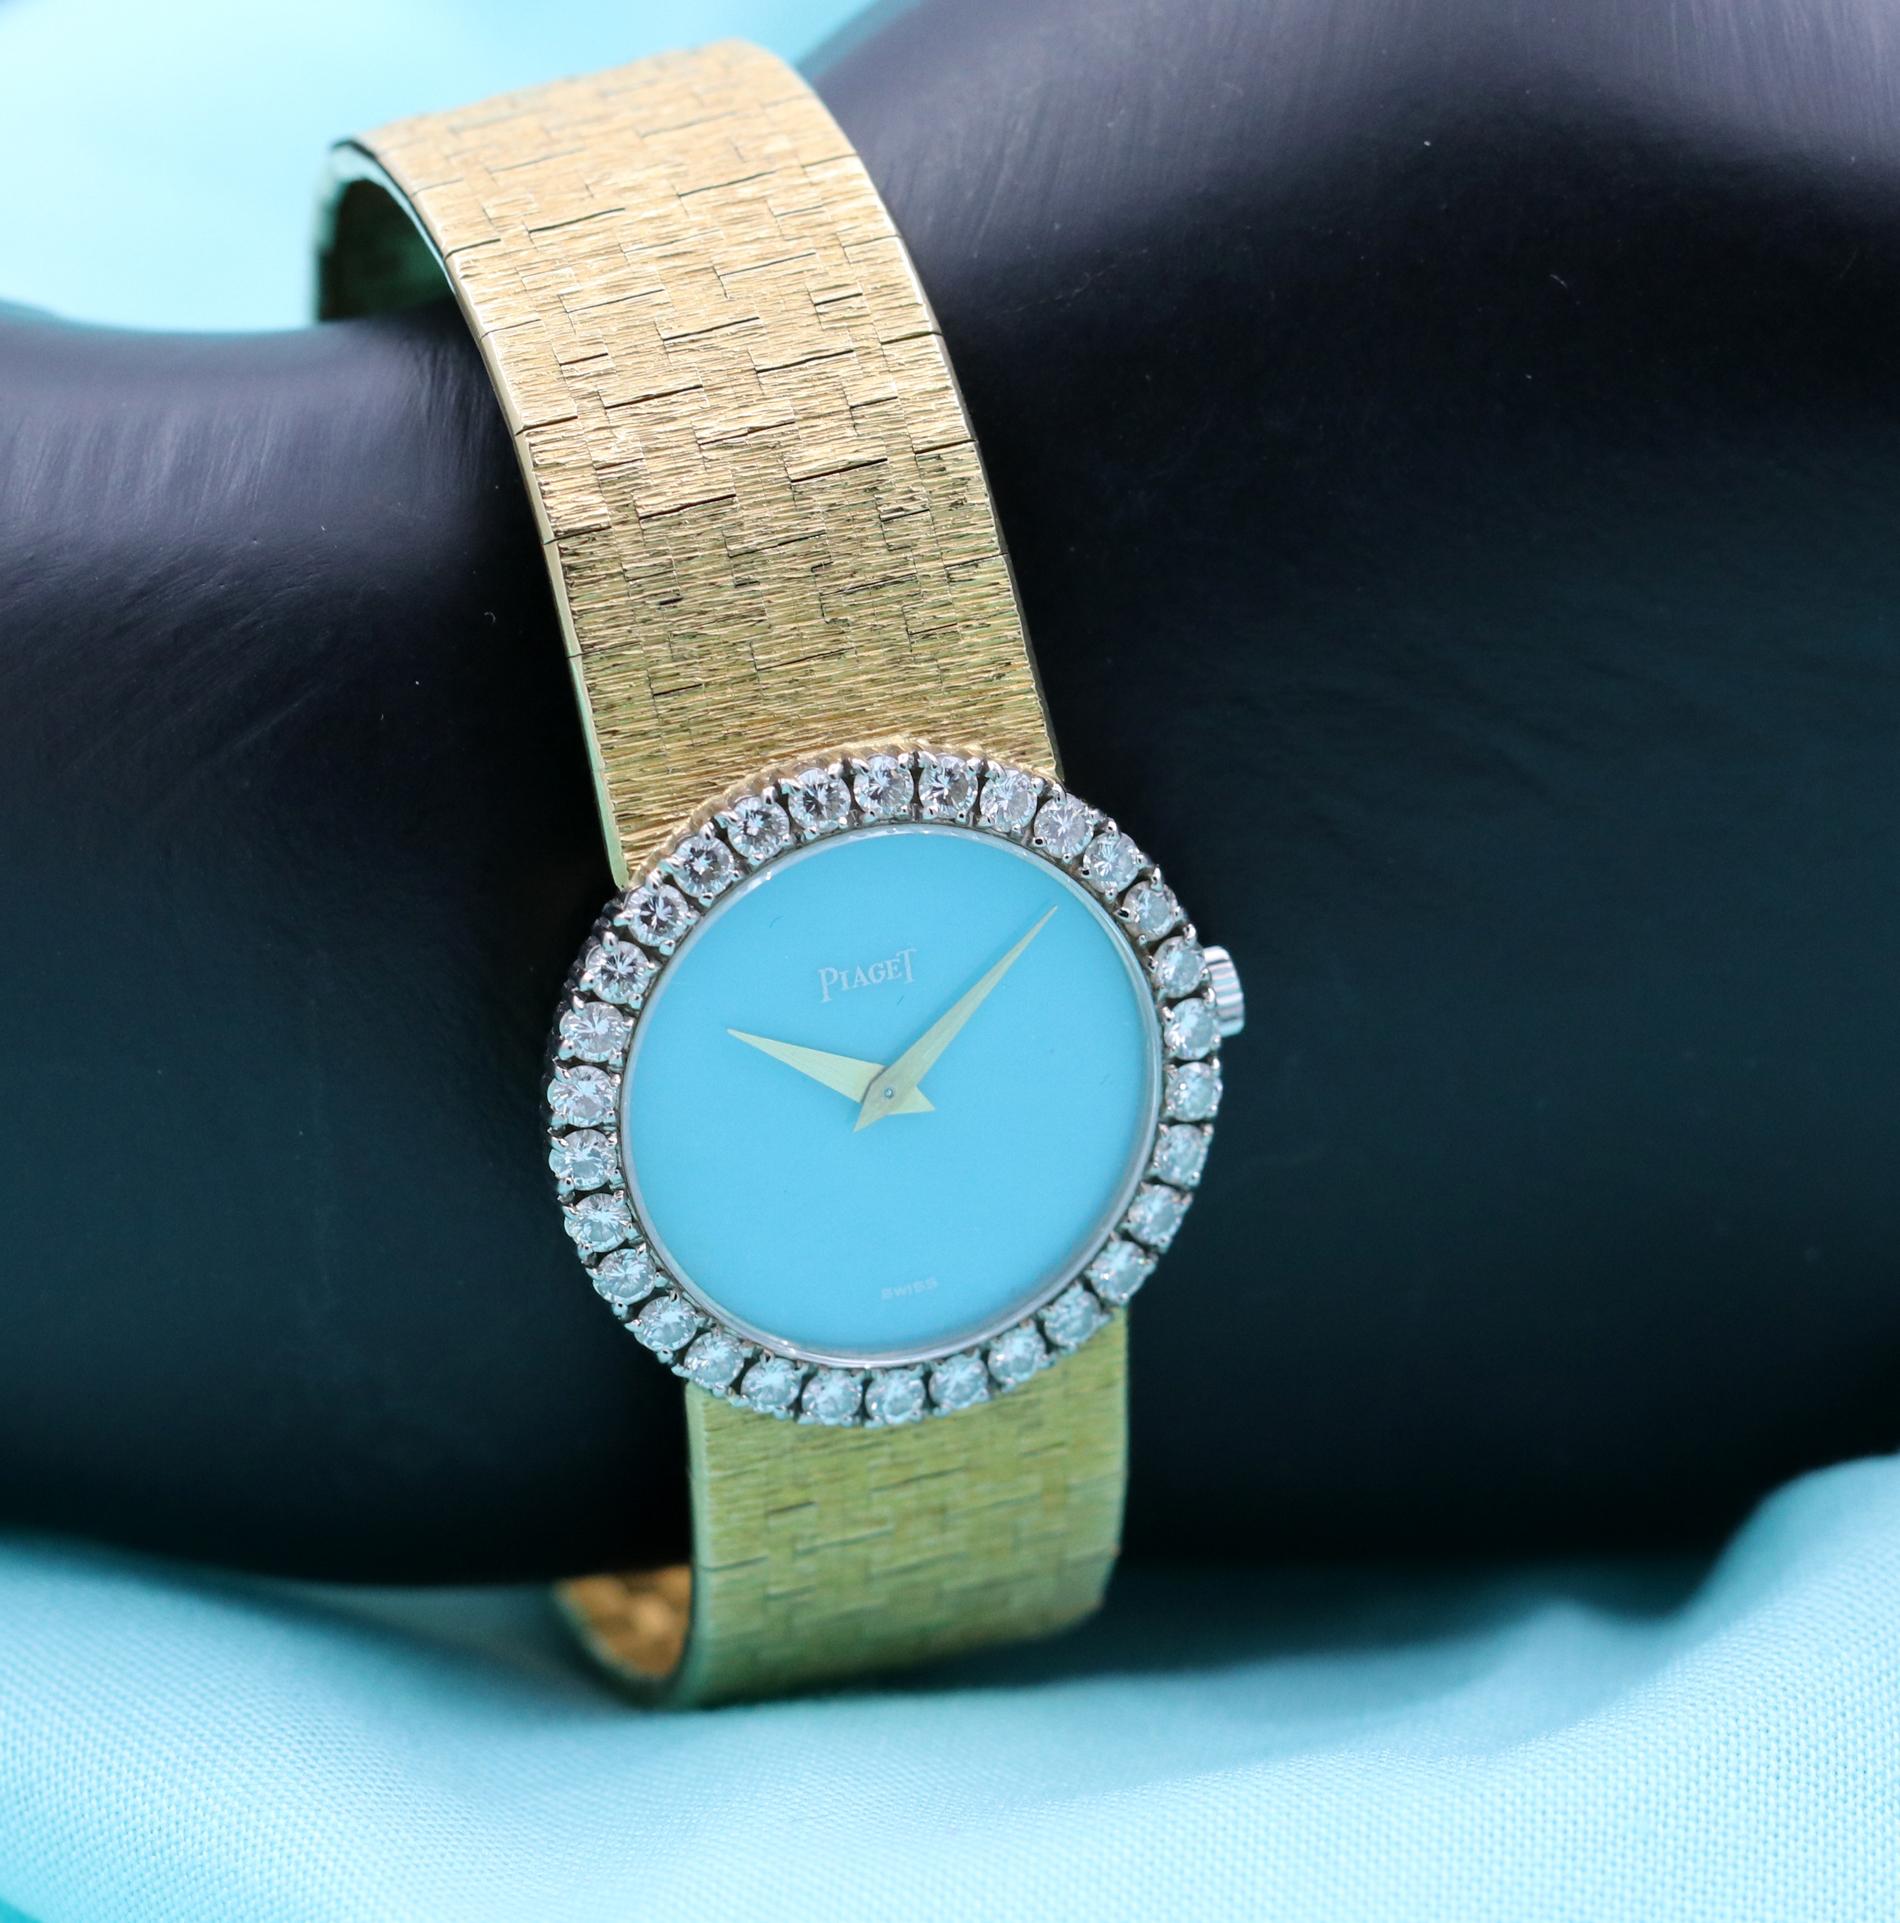 Gold Piaget Wristwatch with Turquoise Dial and Diamond Bezel 2